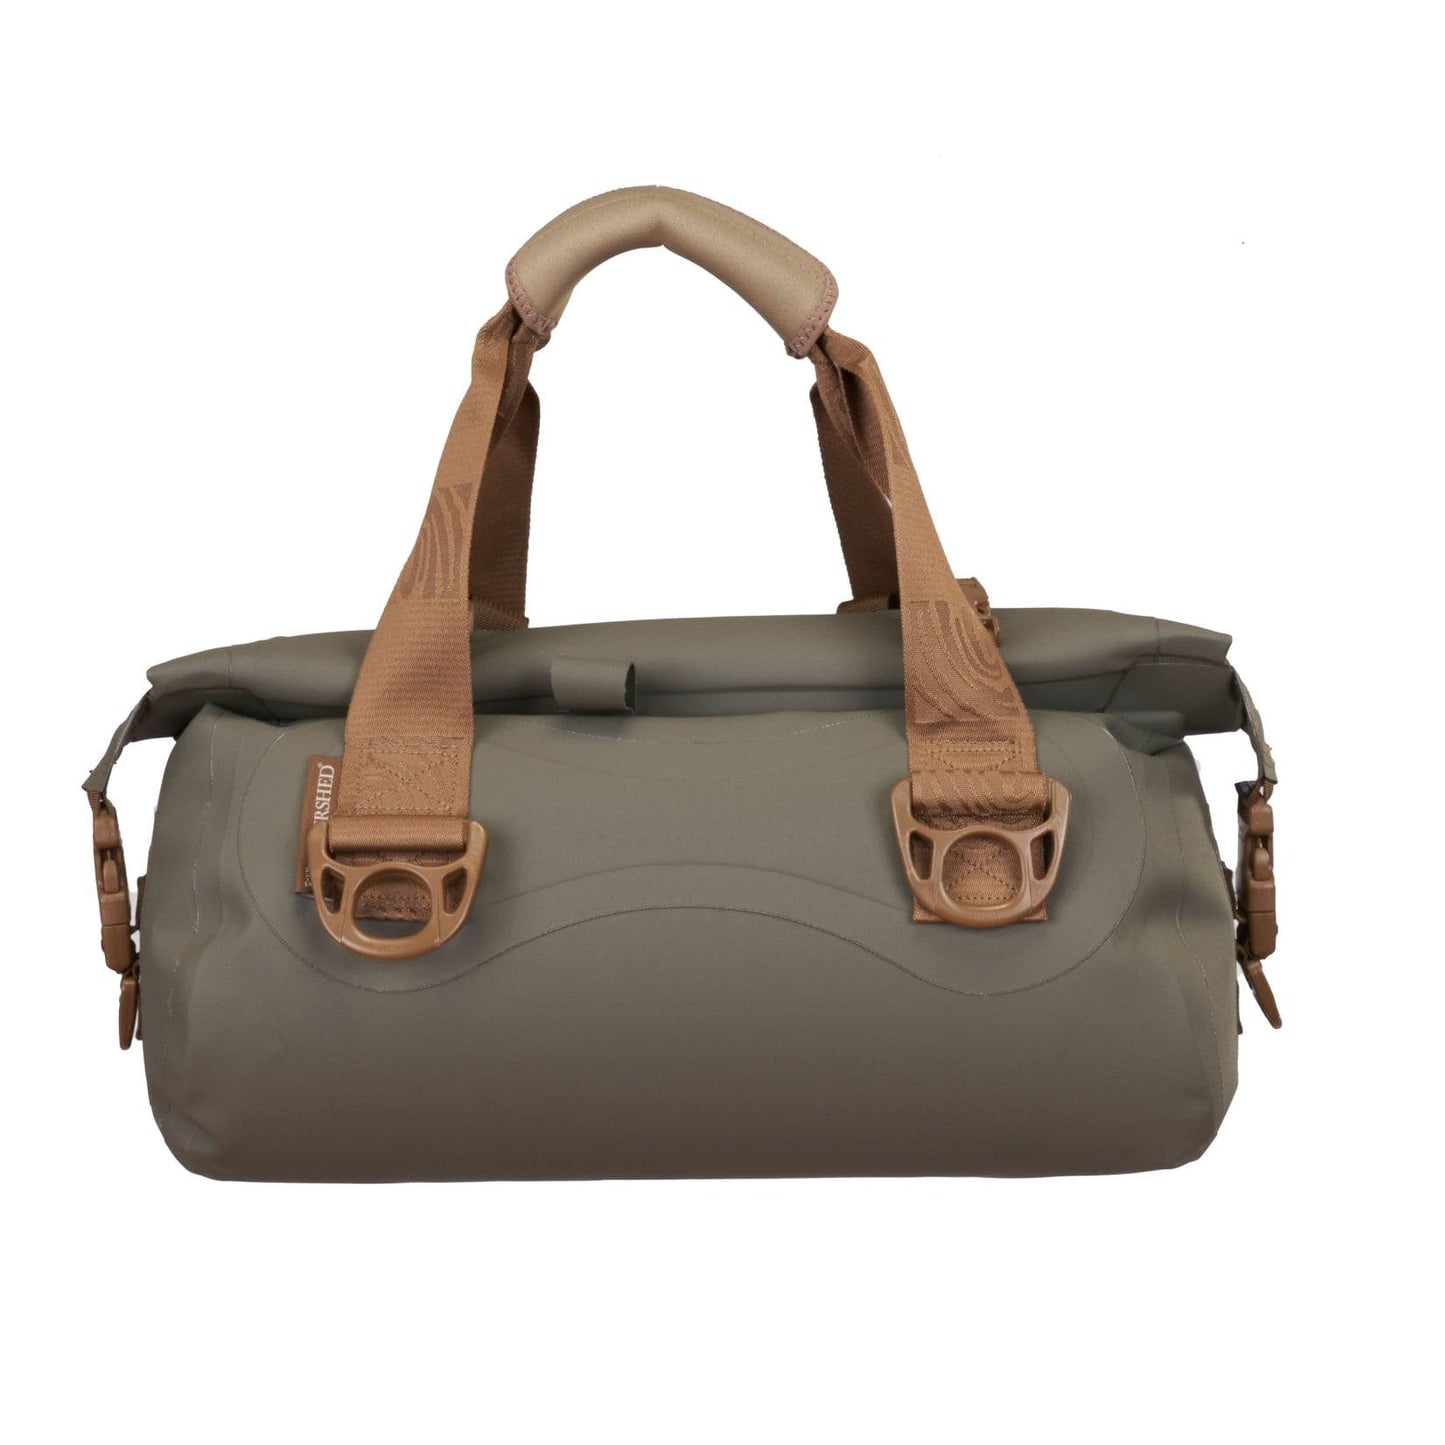 A Watershed Goforth Duffel with a brown handle.